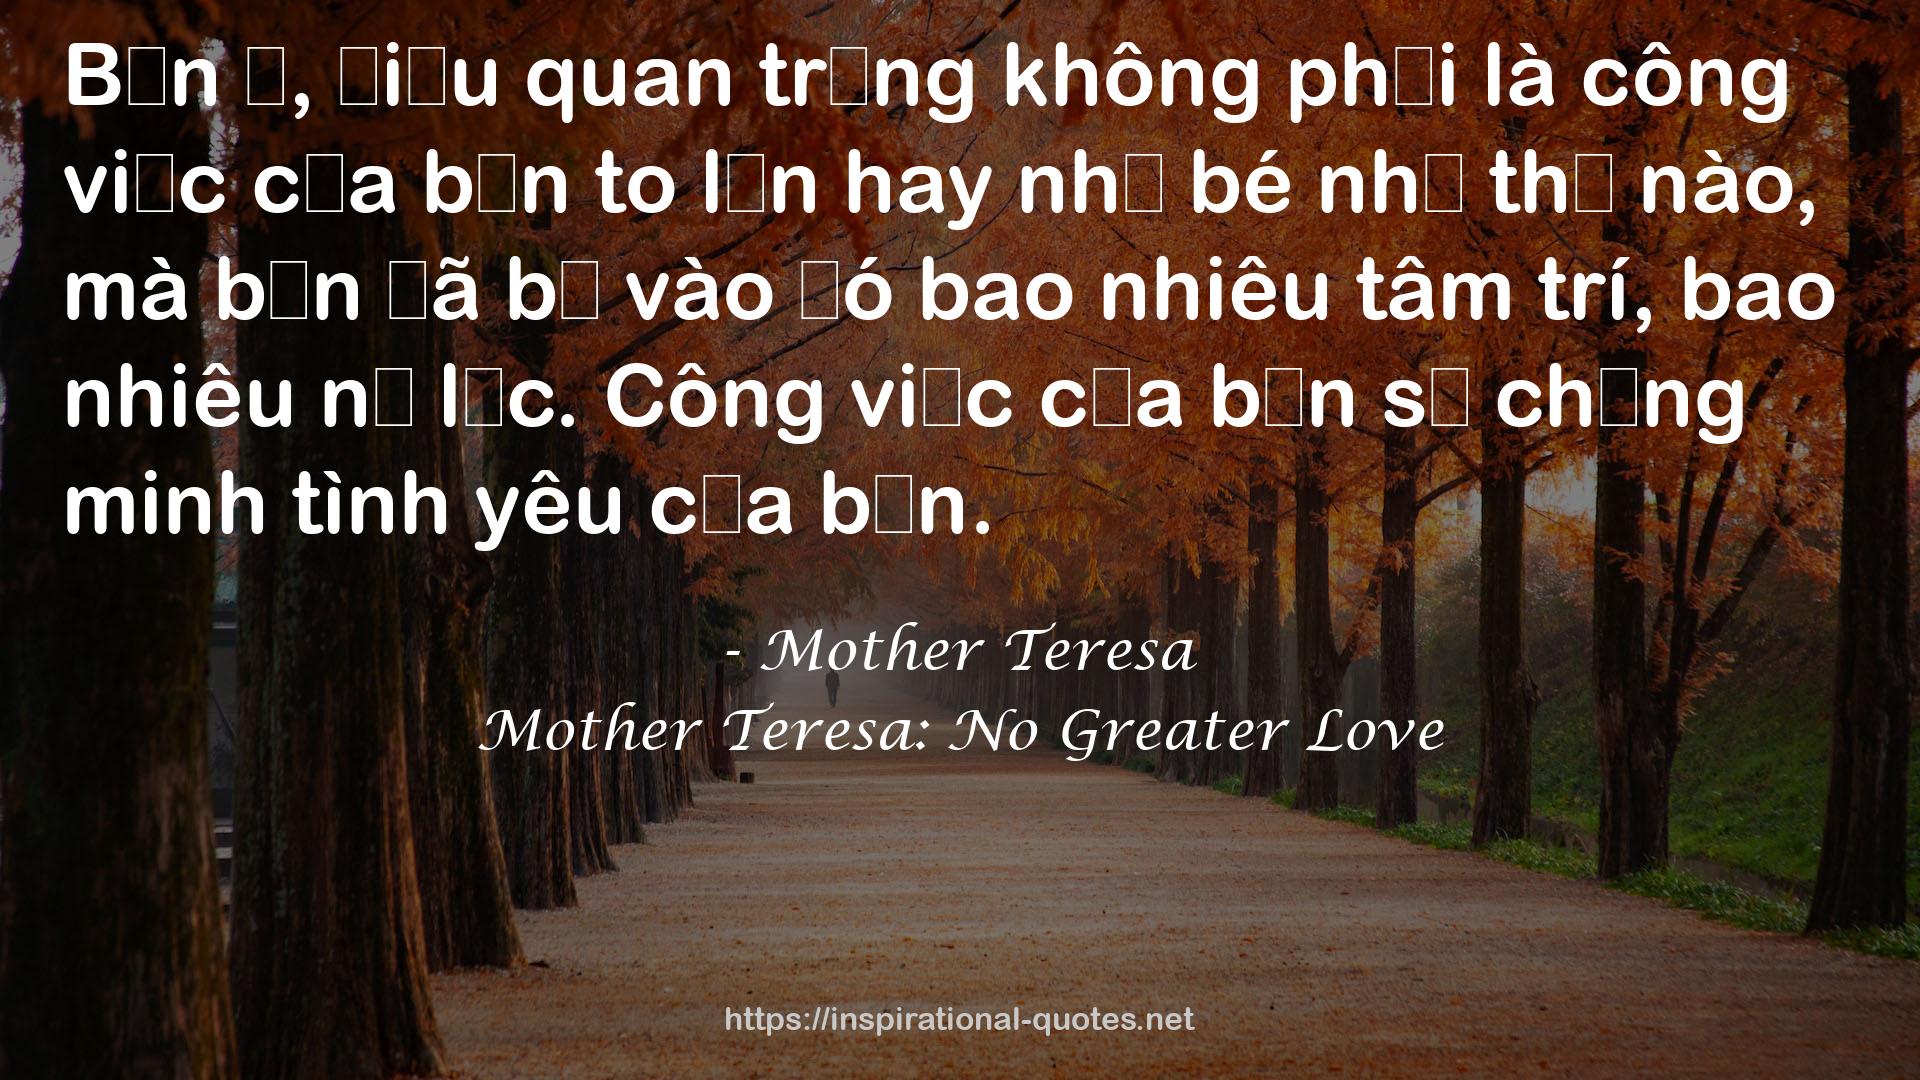 Mother Teresa: No Greater Love QUOTES